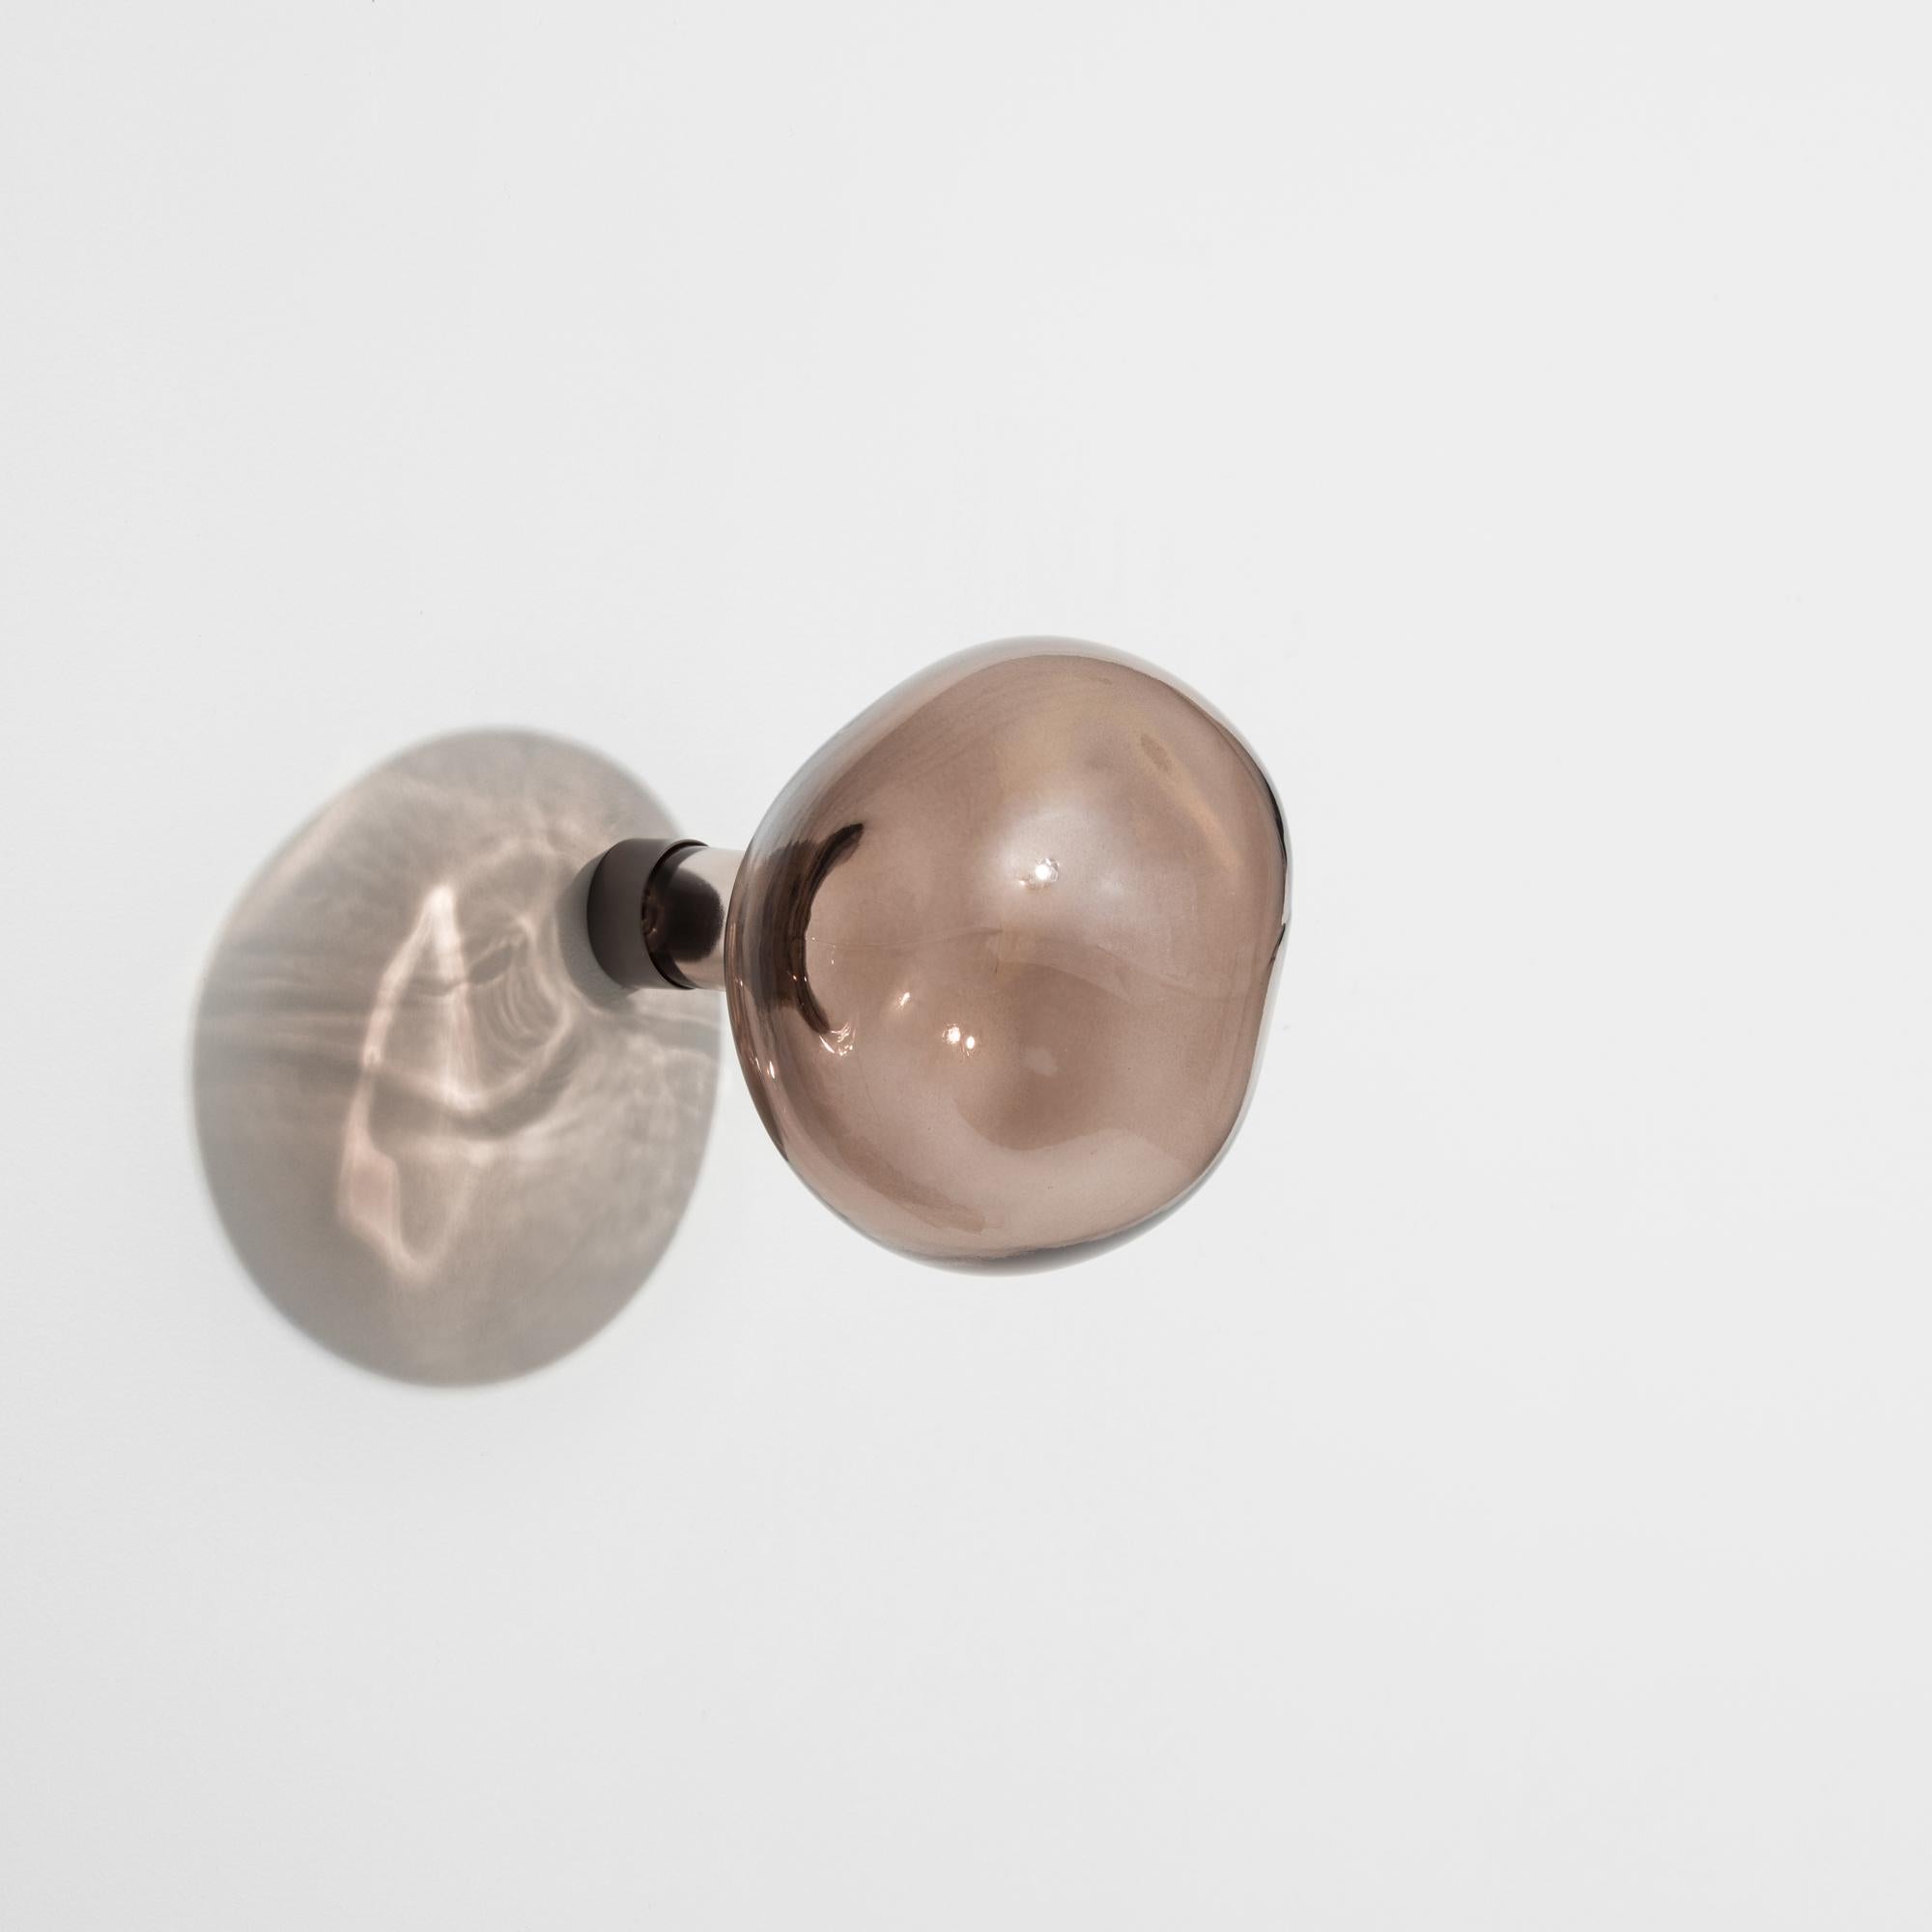 two marbles in a hanger